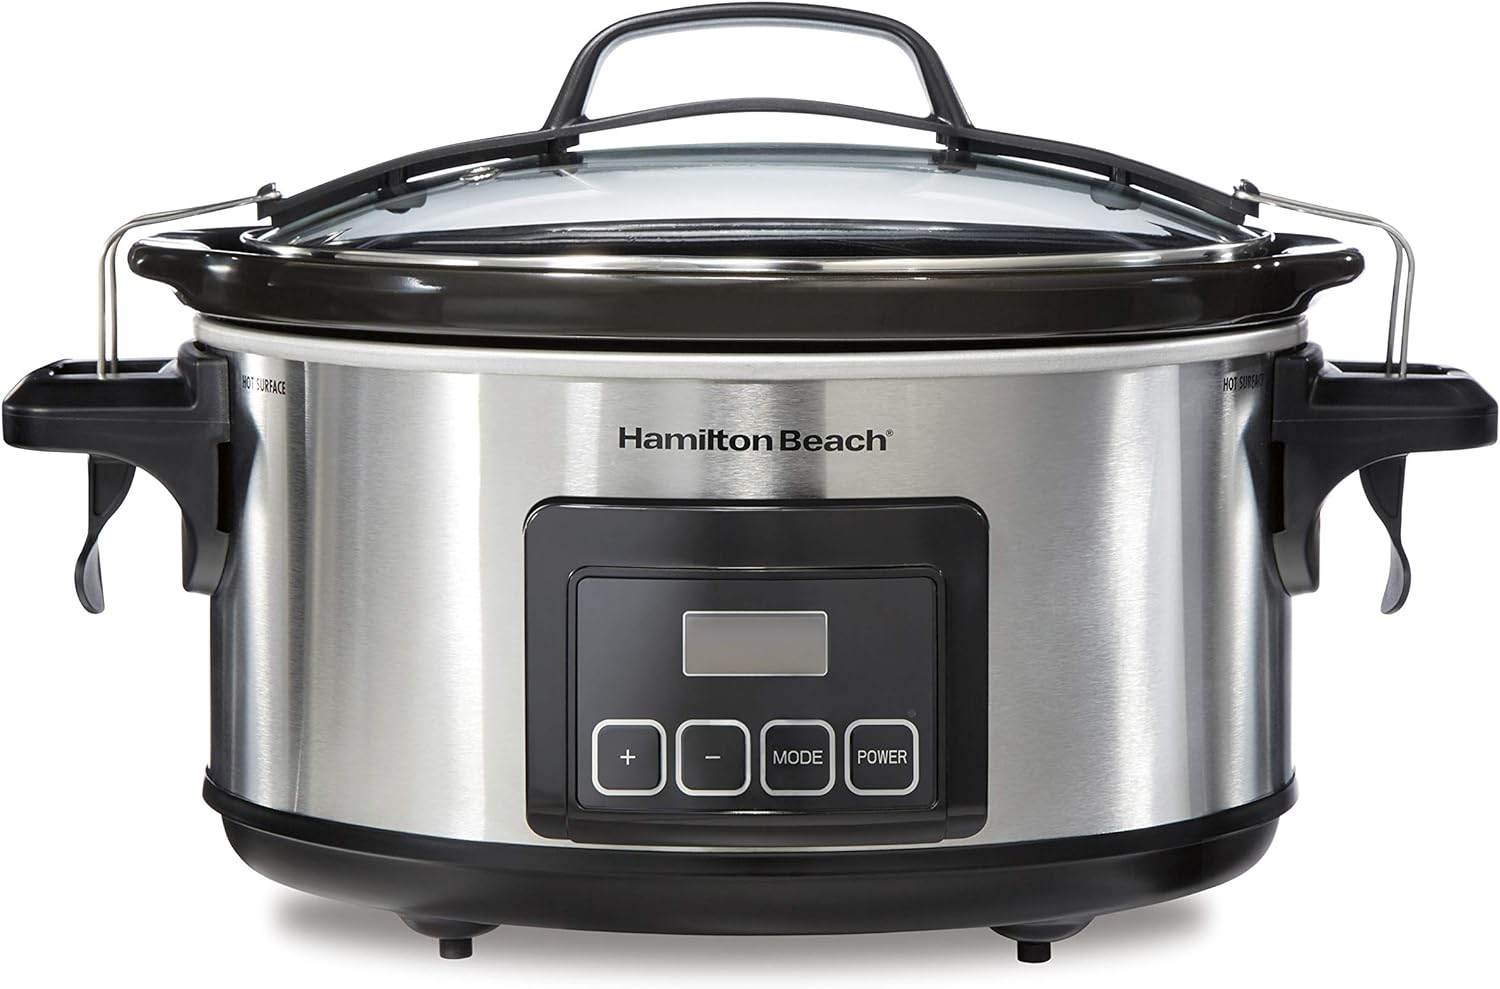 Hamilton Beach Portable 6-Quart Stay or Go Programmable Slow Cooker with Lid Lock, Stainless Steel (33561)